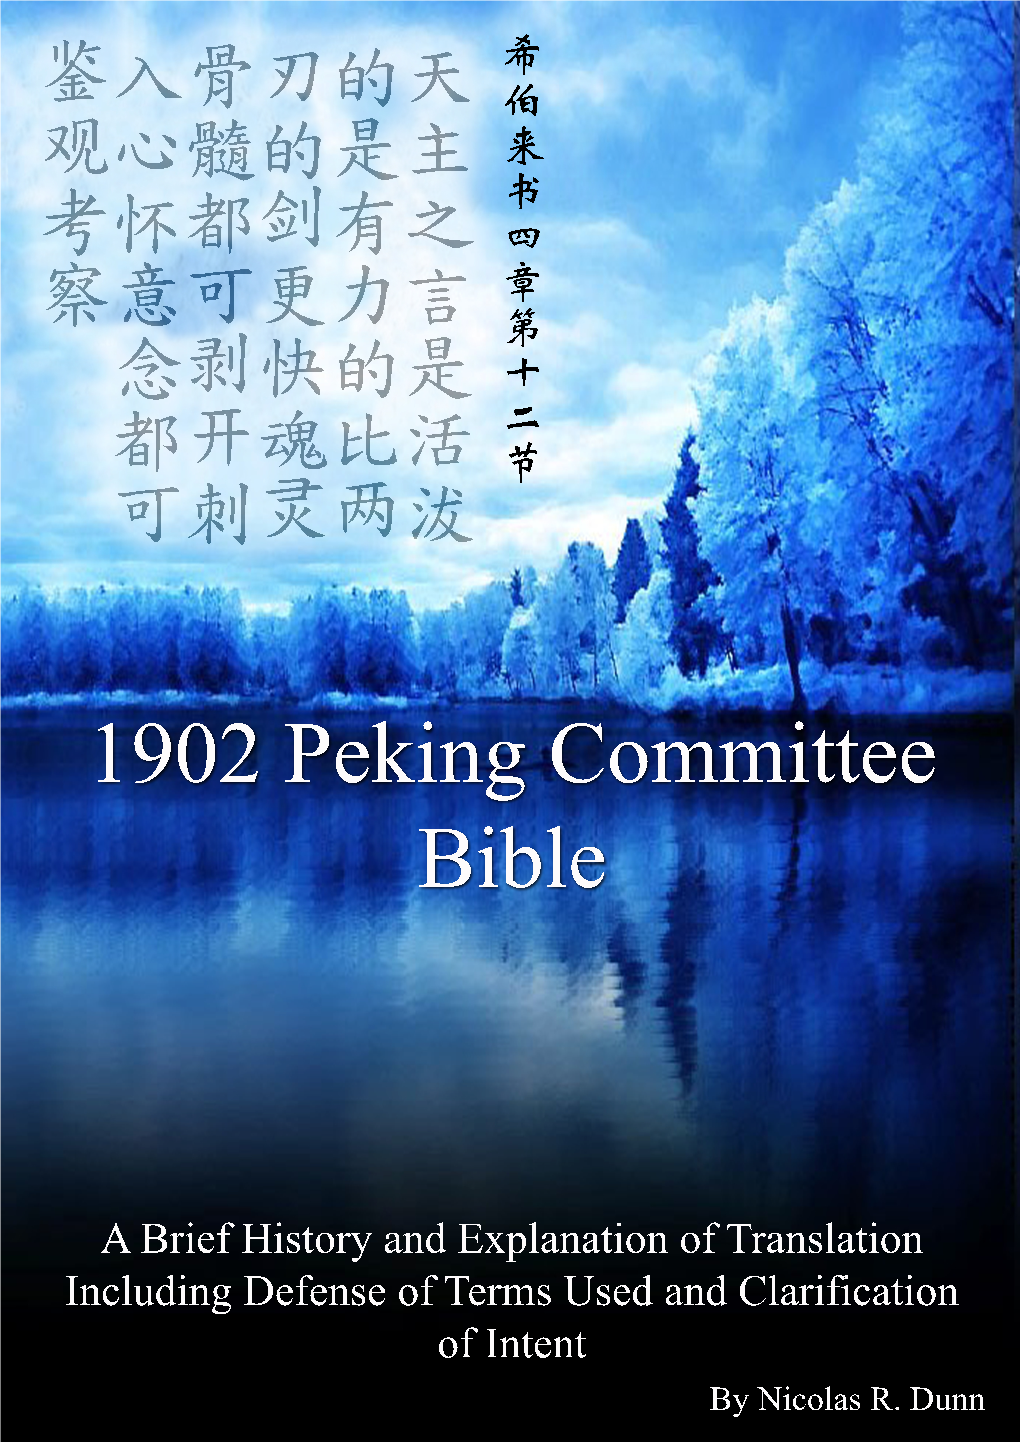 Introduction to the 1902 Peking Committee Mandarin Bible: a Brief